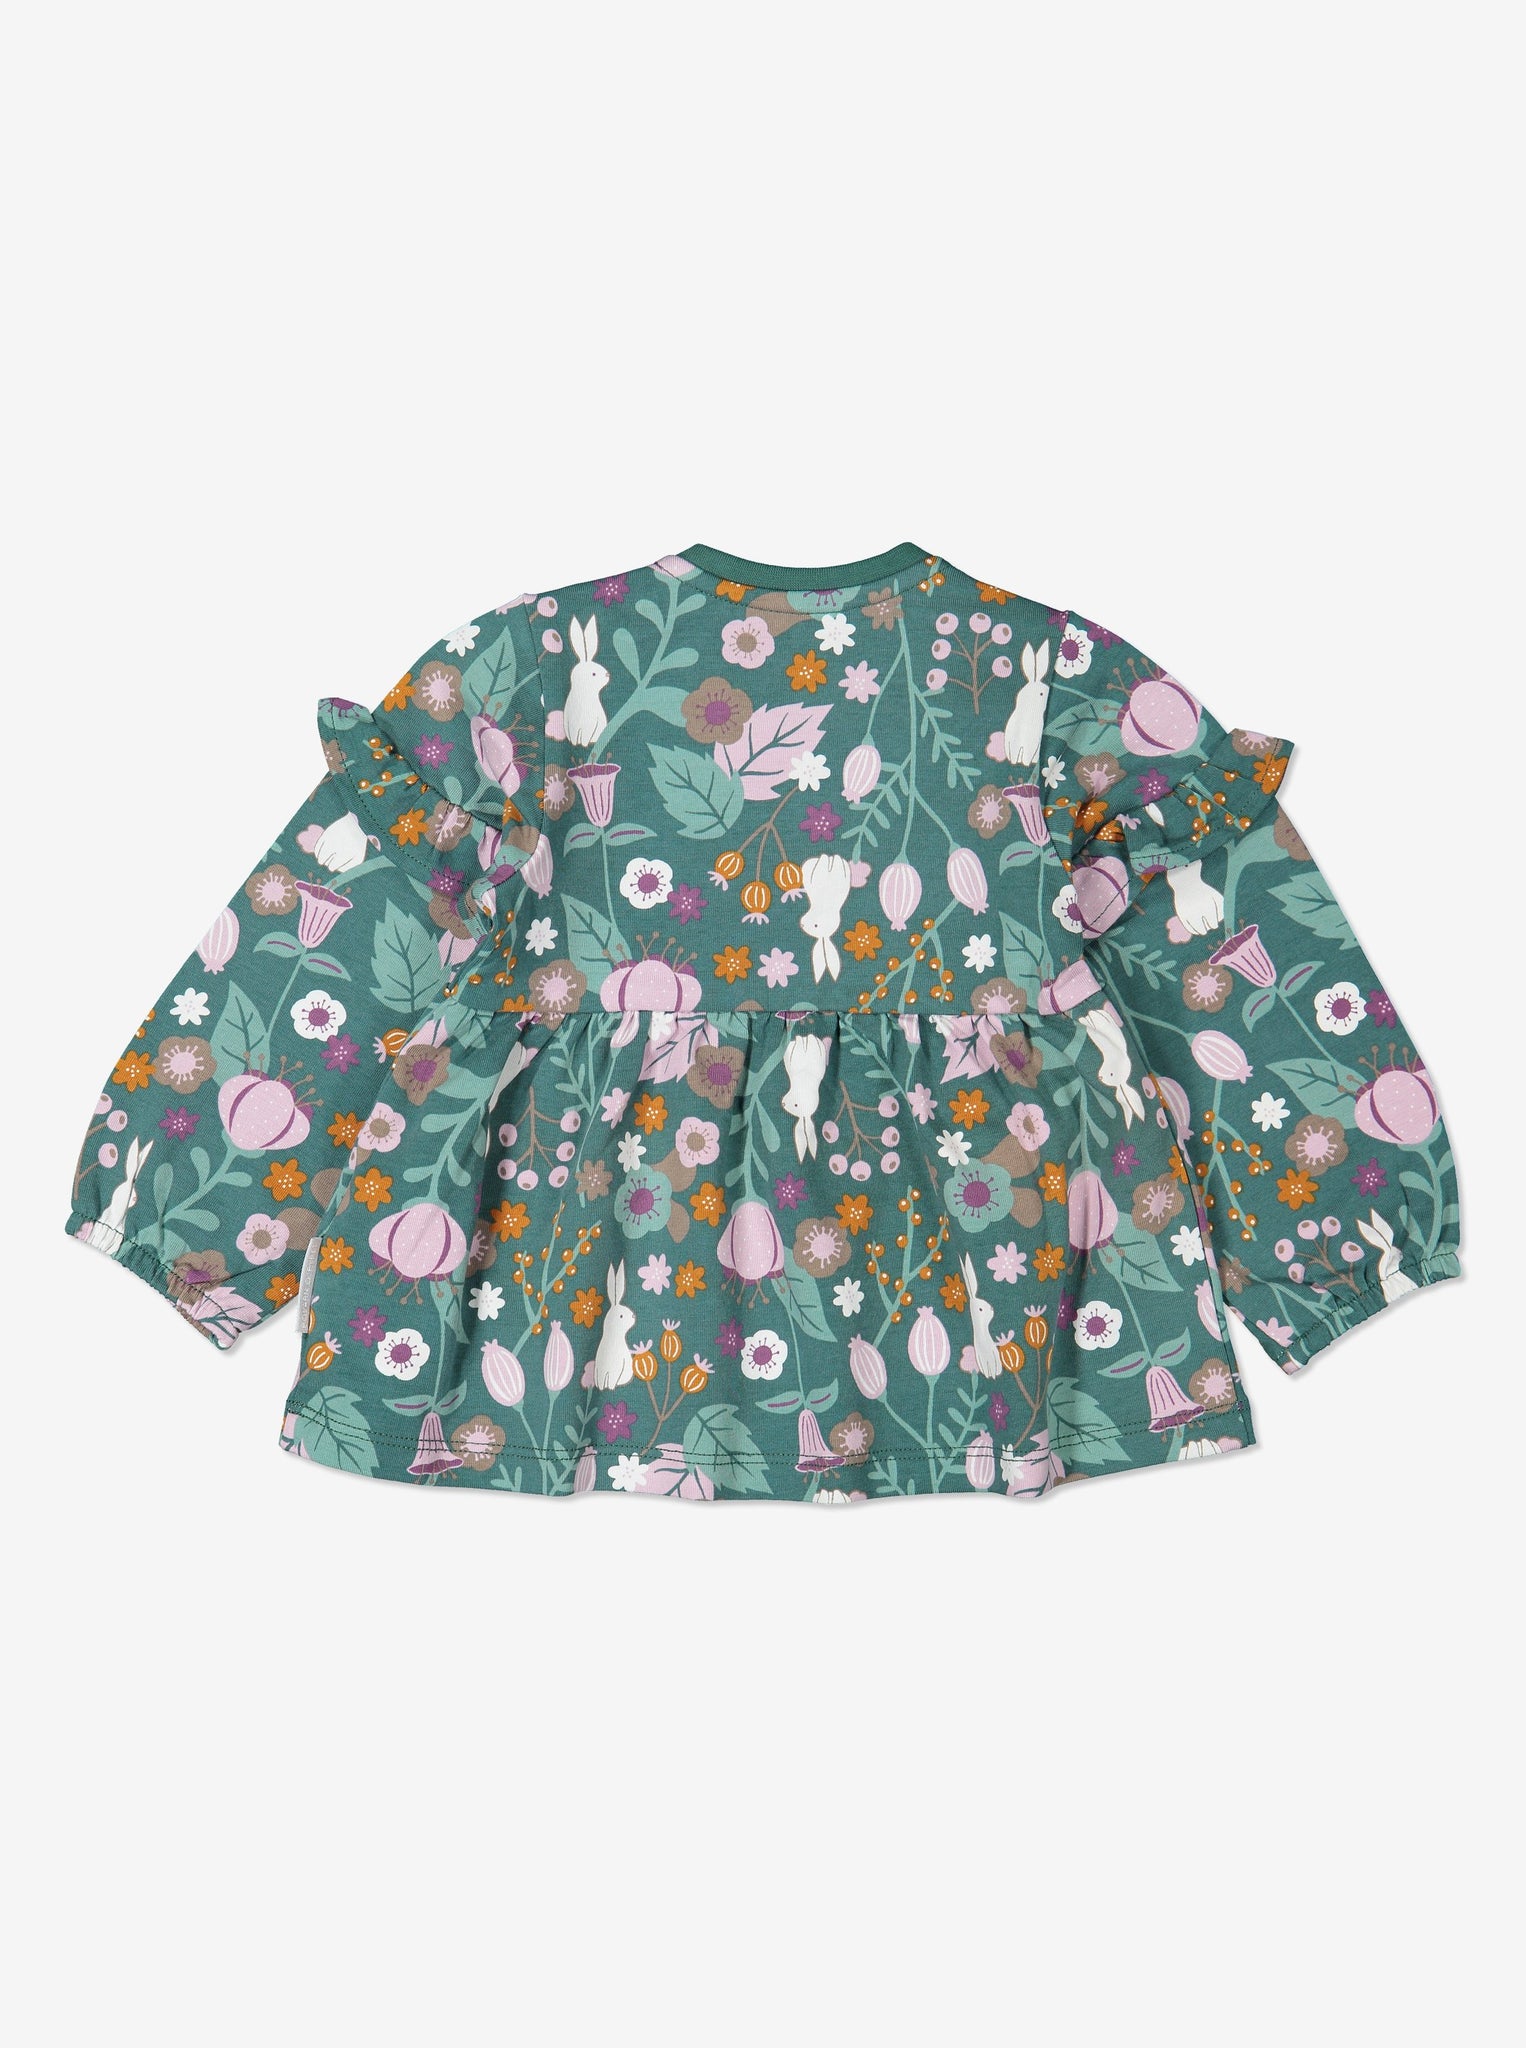 Back view woodland print top for baby girls with frilled shoulders, made from organic cotton fabric